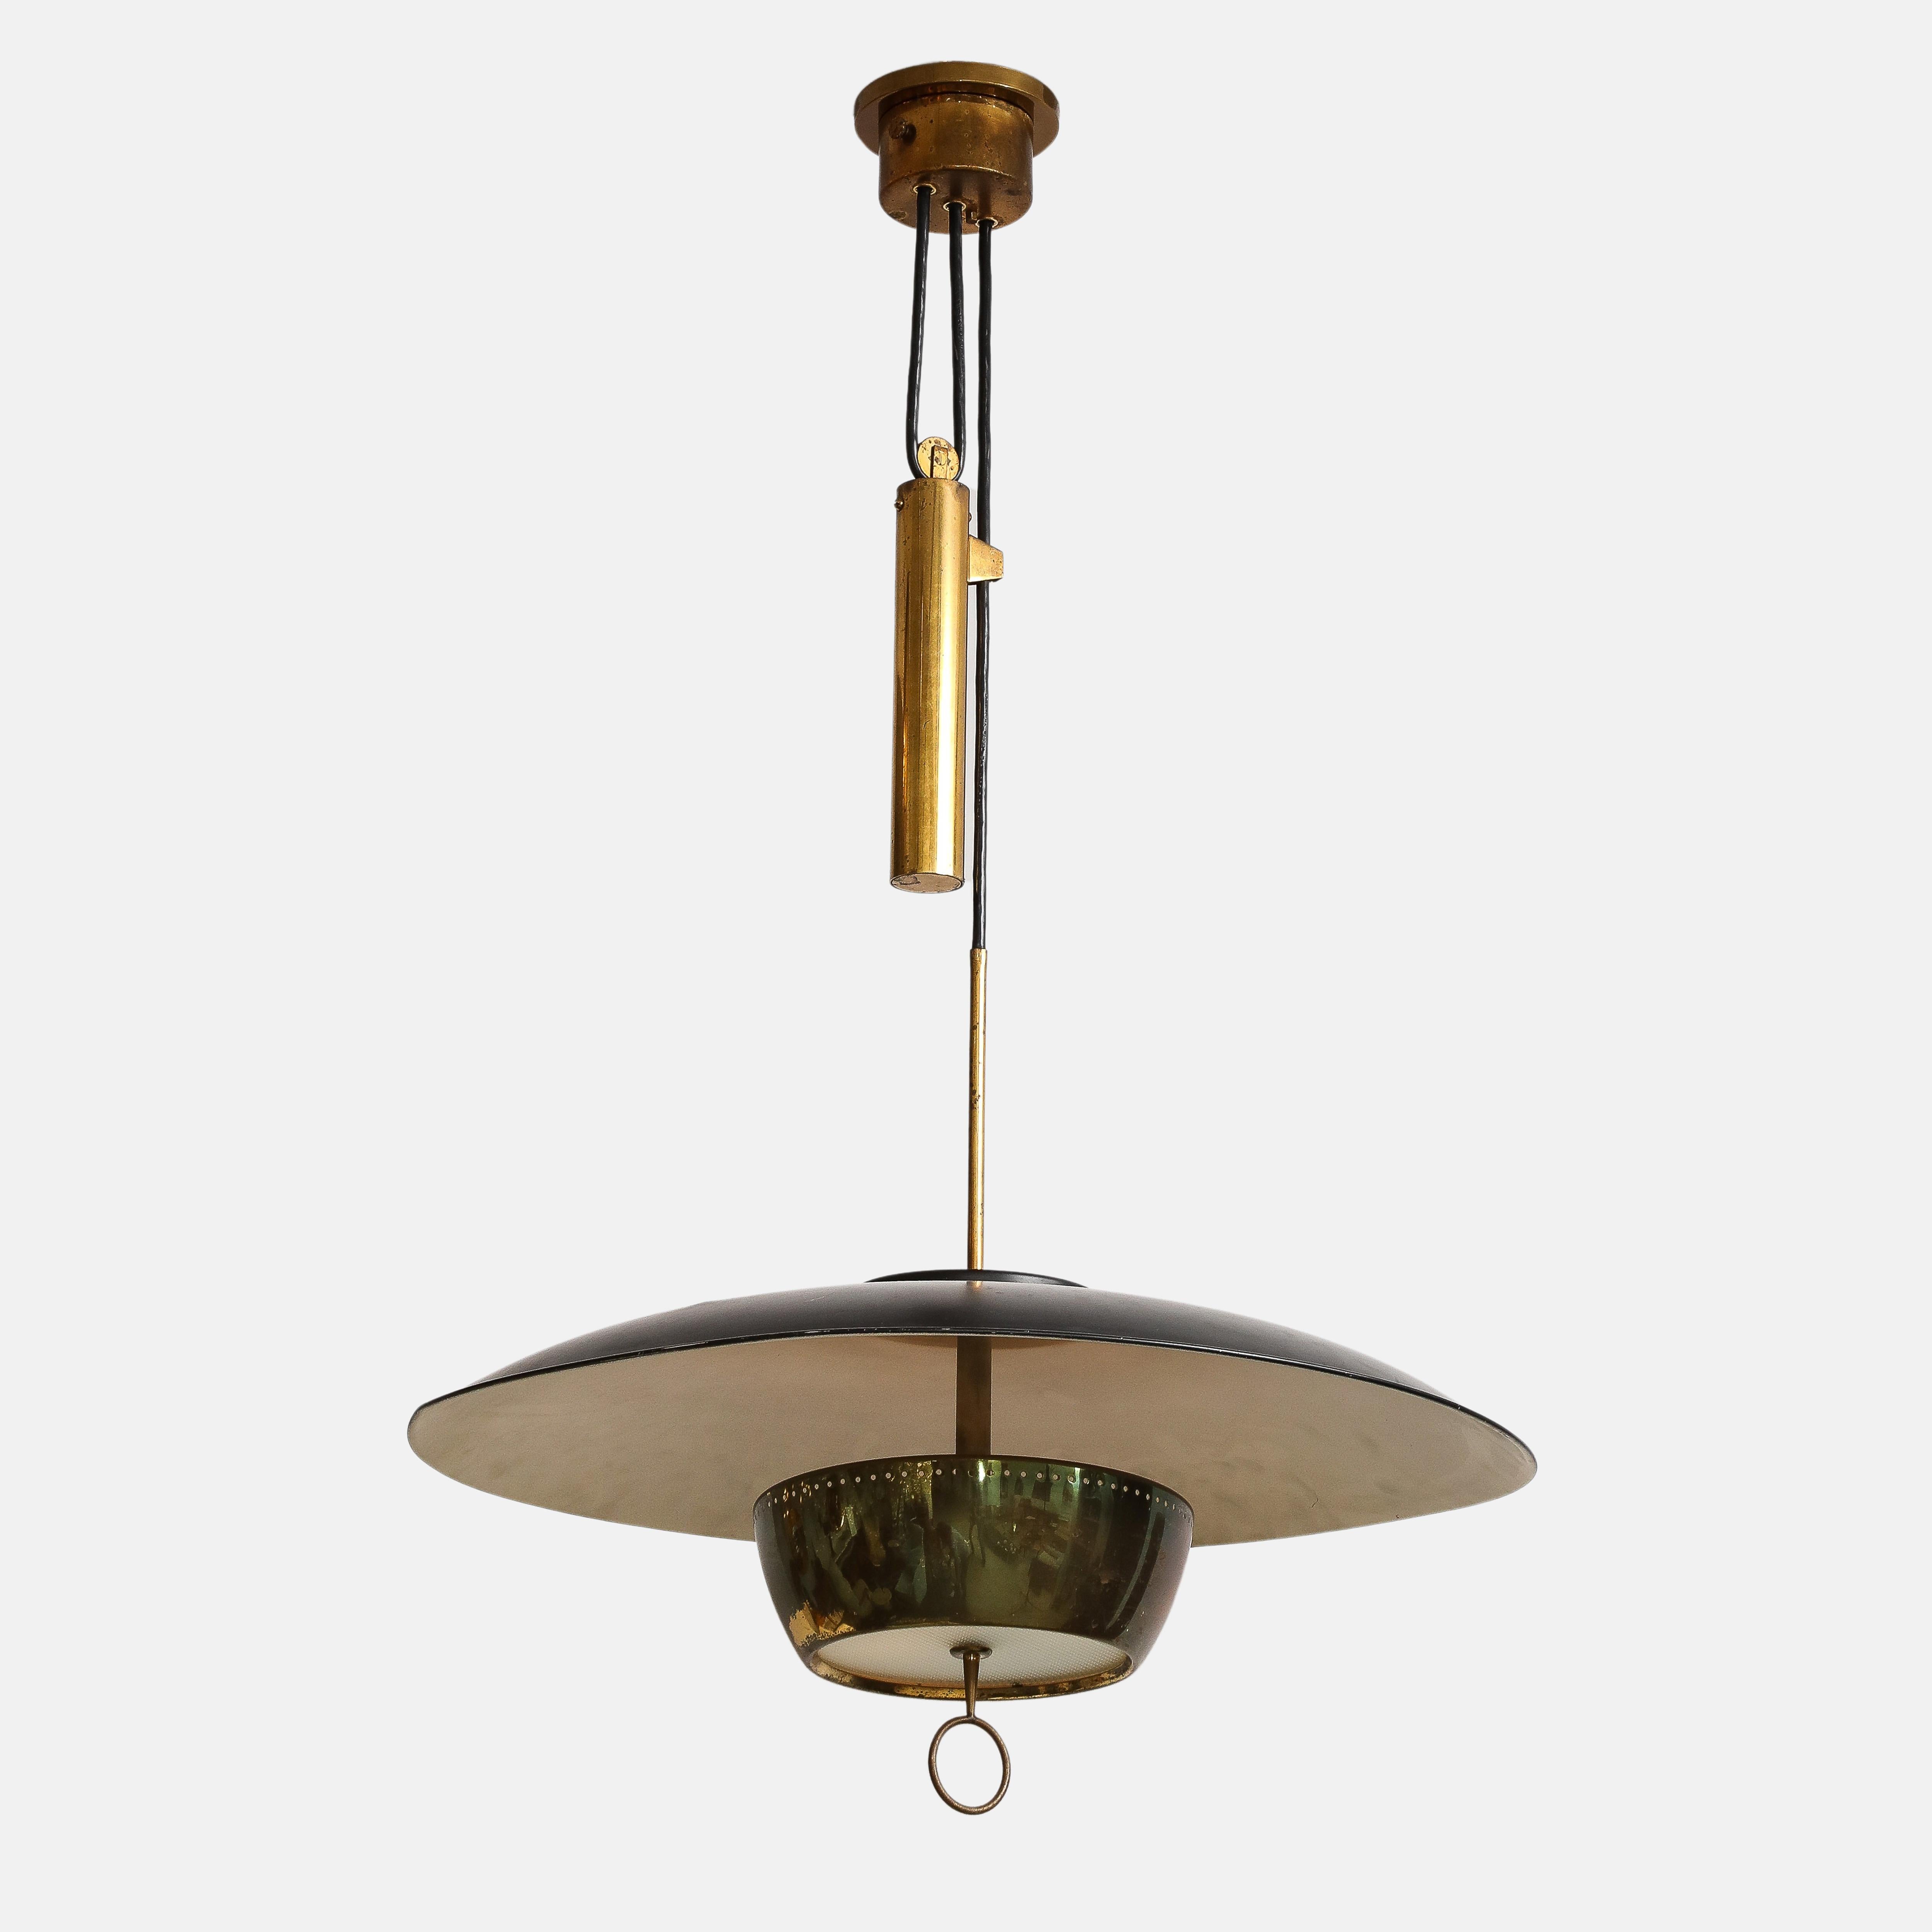 Designed by Gaetano Scolari for Stilnovo adjustable counterweight ceiling or suspension light model A5011, Italy, 1950.  This modernist ceiling or pendant light is composed of a black enameled metal lampshade over perforated brass and molded glass